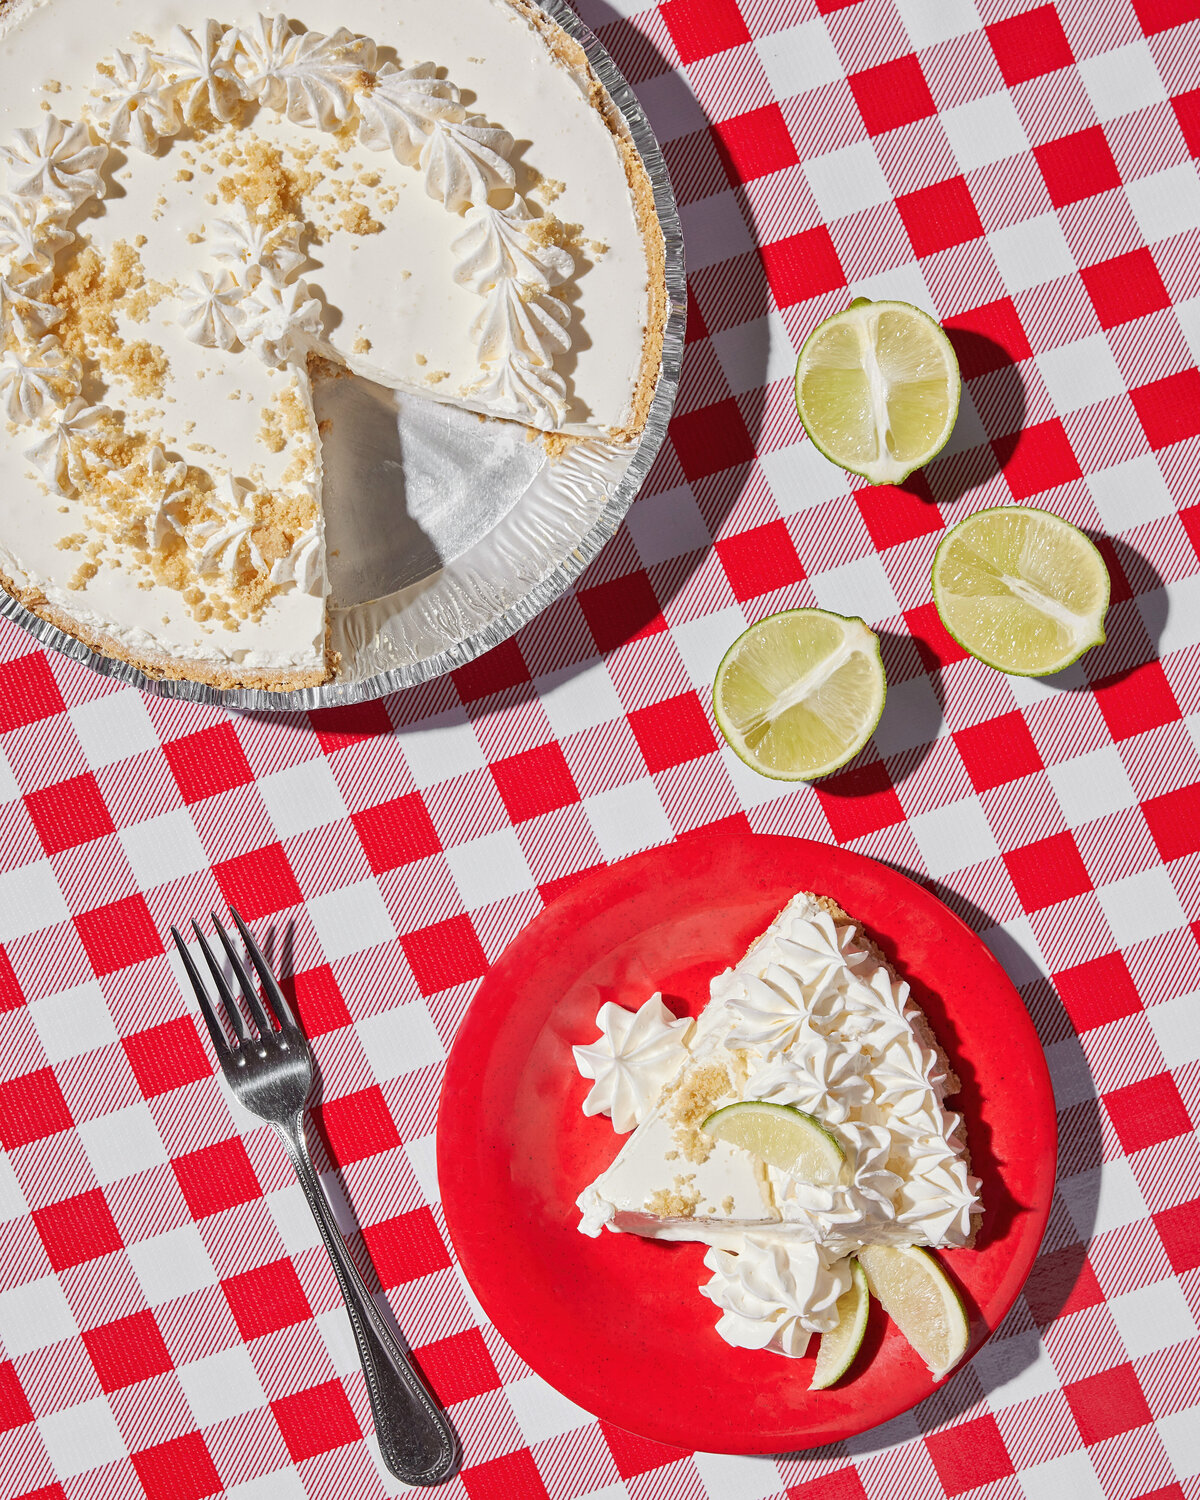 A key lime pie with a single piece on a red plate